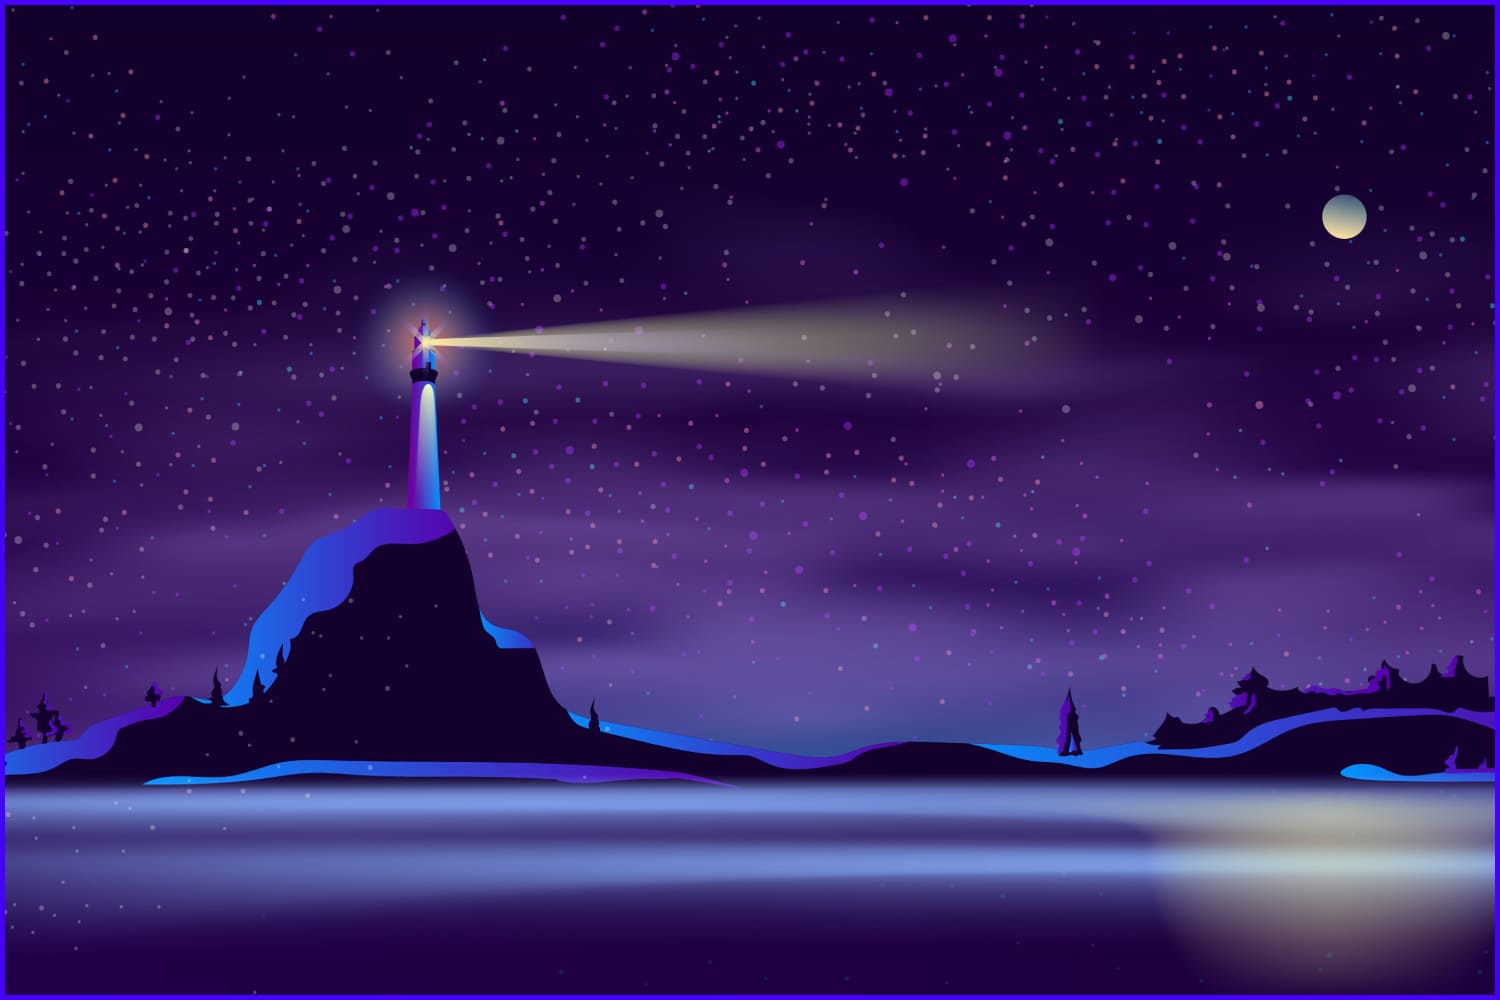 Drawing of a lighthouse against the background of a starry sky in purple tones.